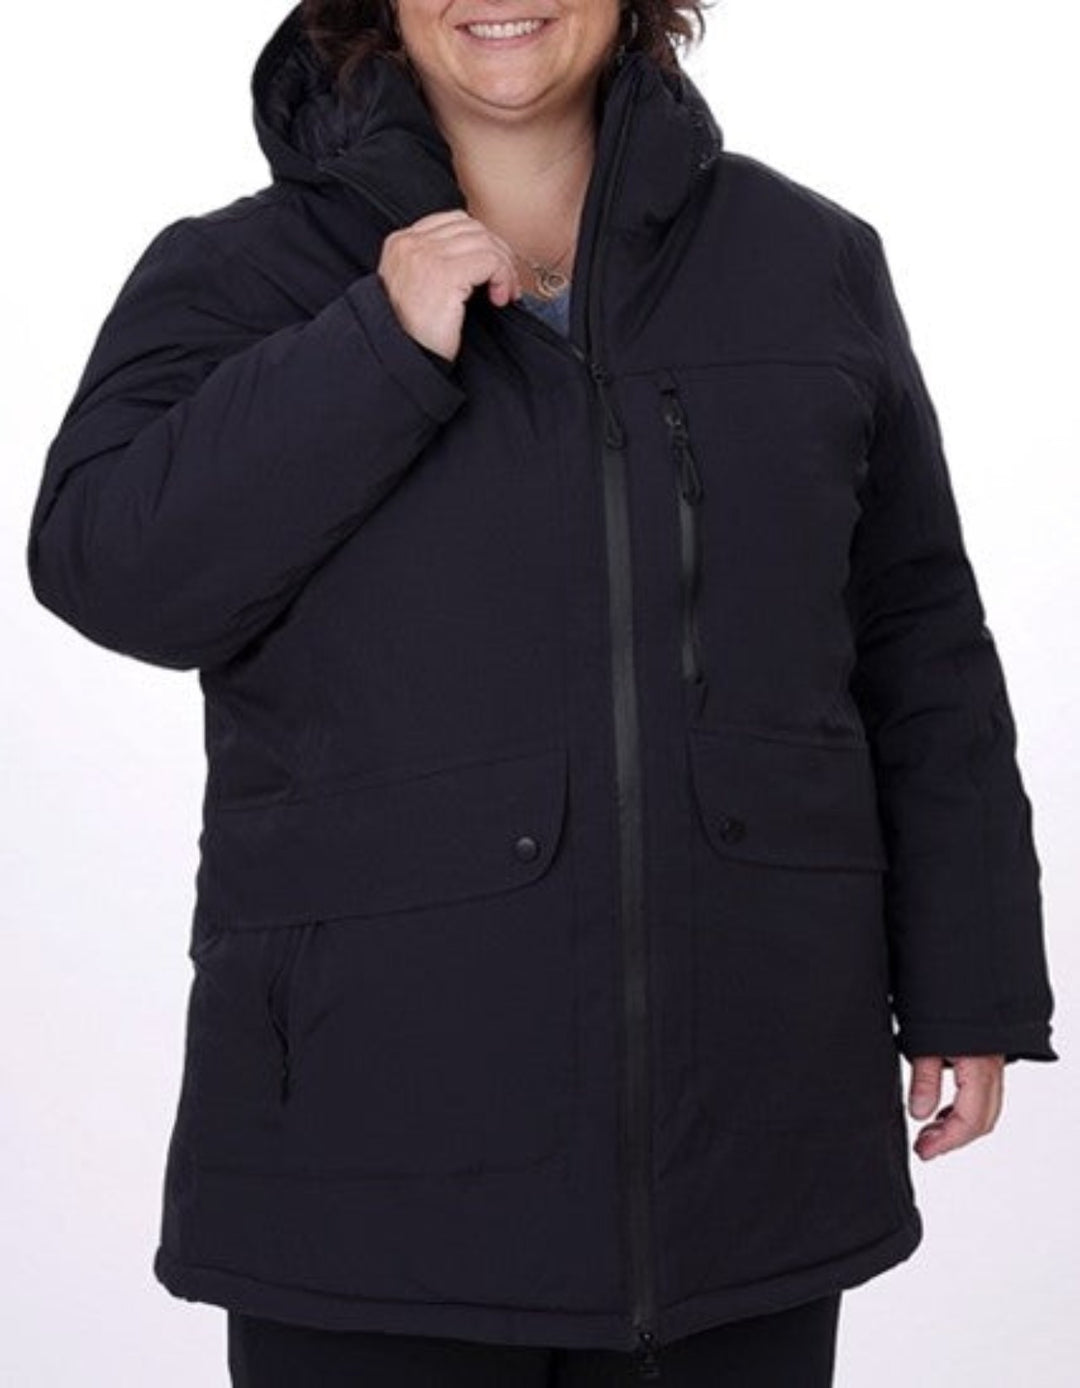 Plus Size Turin Insulated Jacket by Sportive Plus*